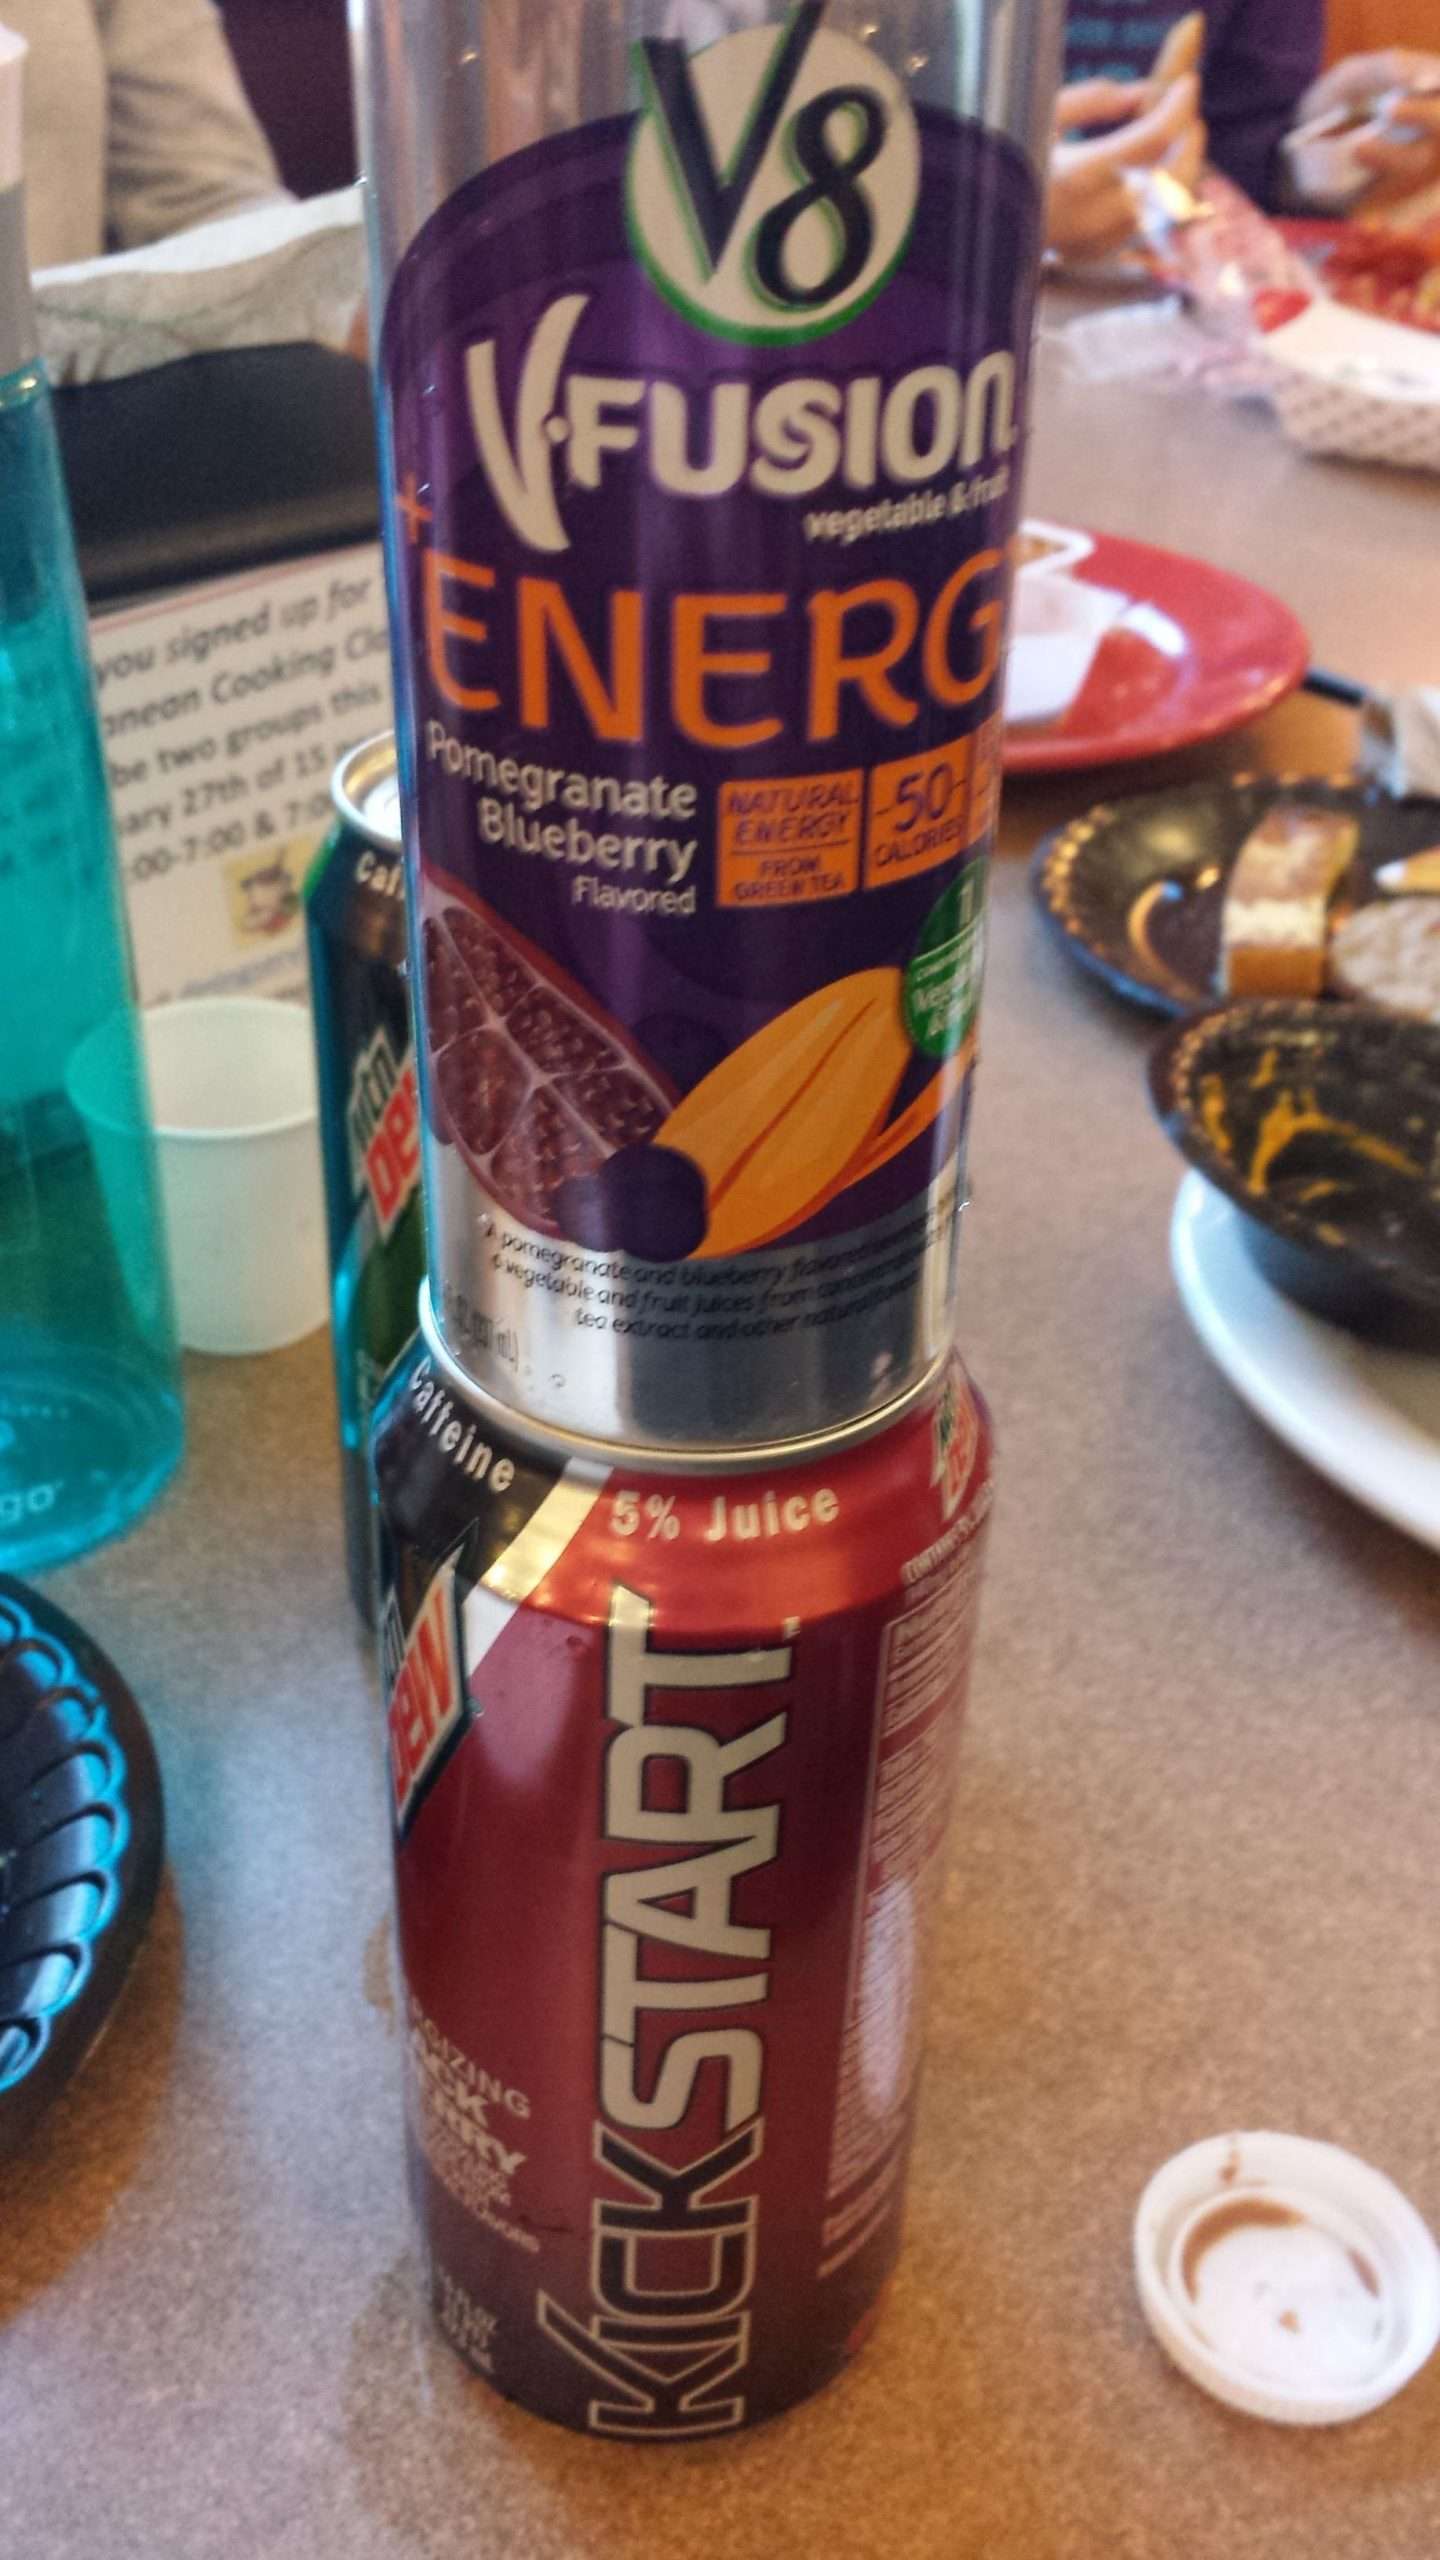 V8 Fusion energy drink on top of a Kickstart : Perfectfit